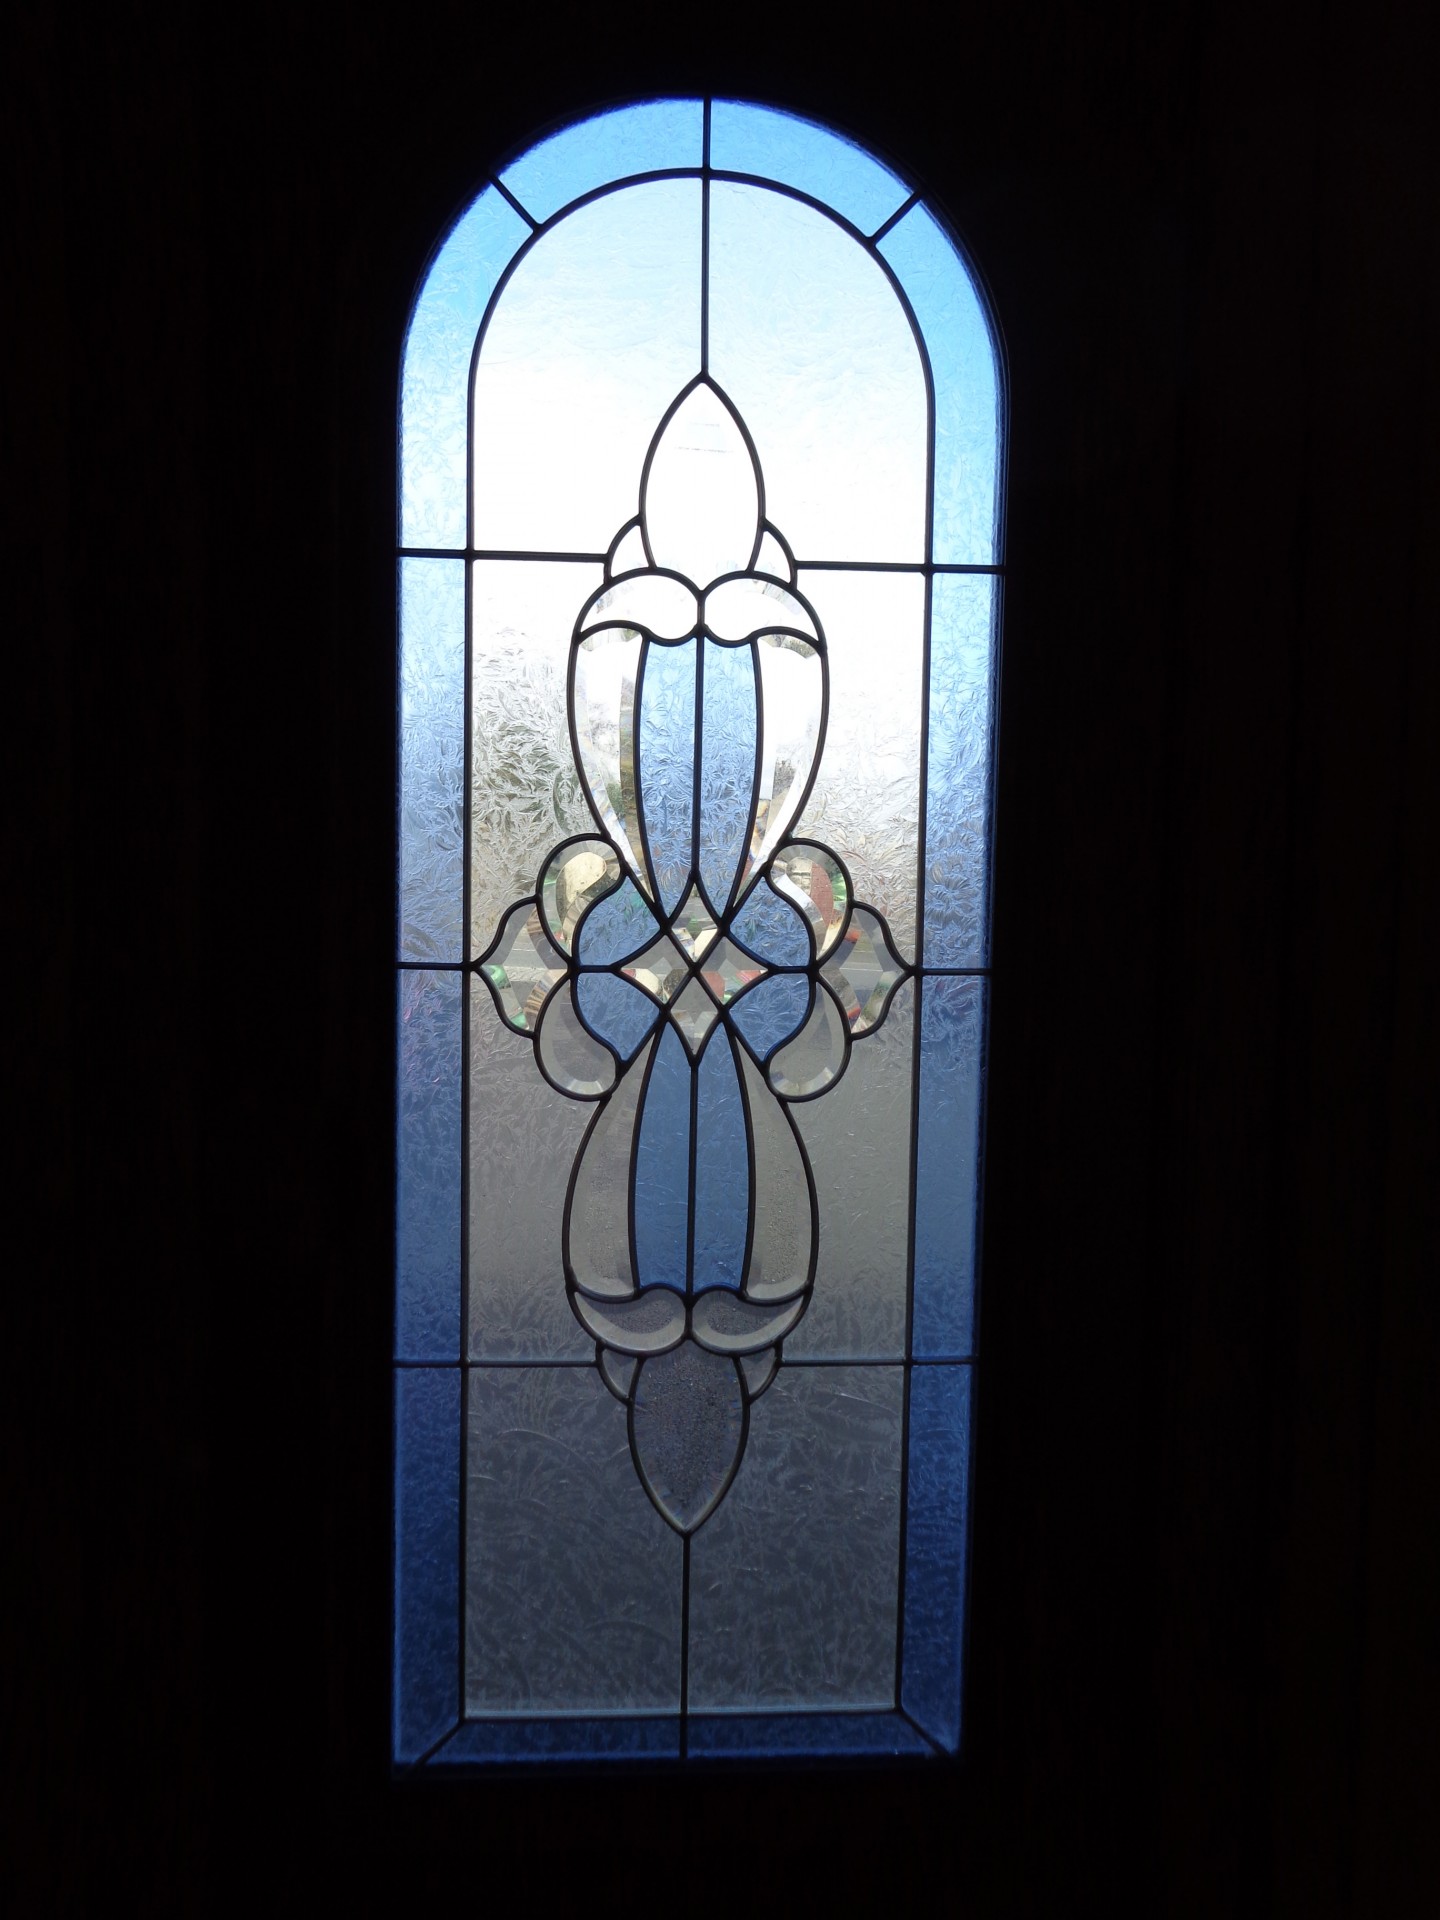 Photograph of a modern stained glass window.